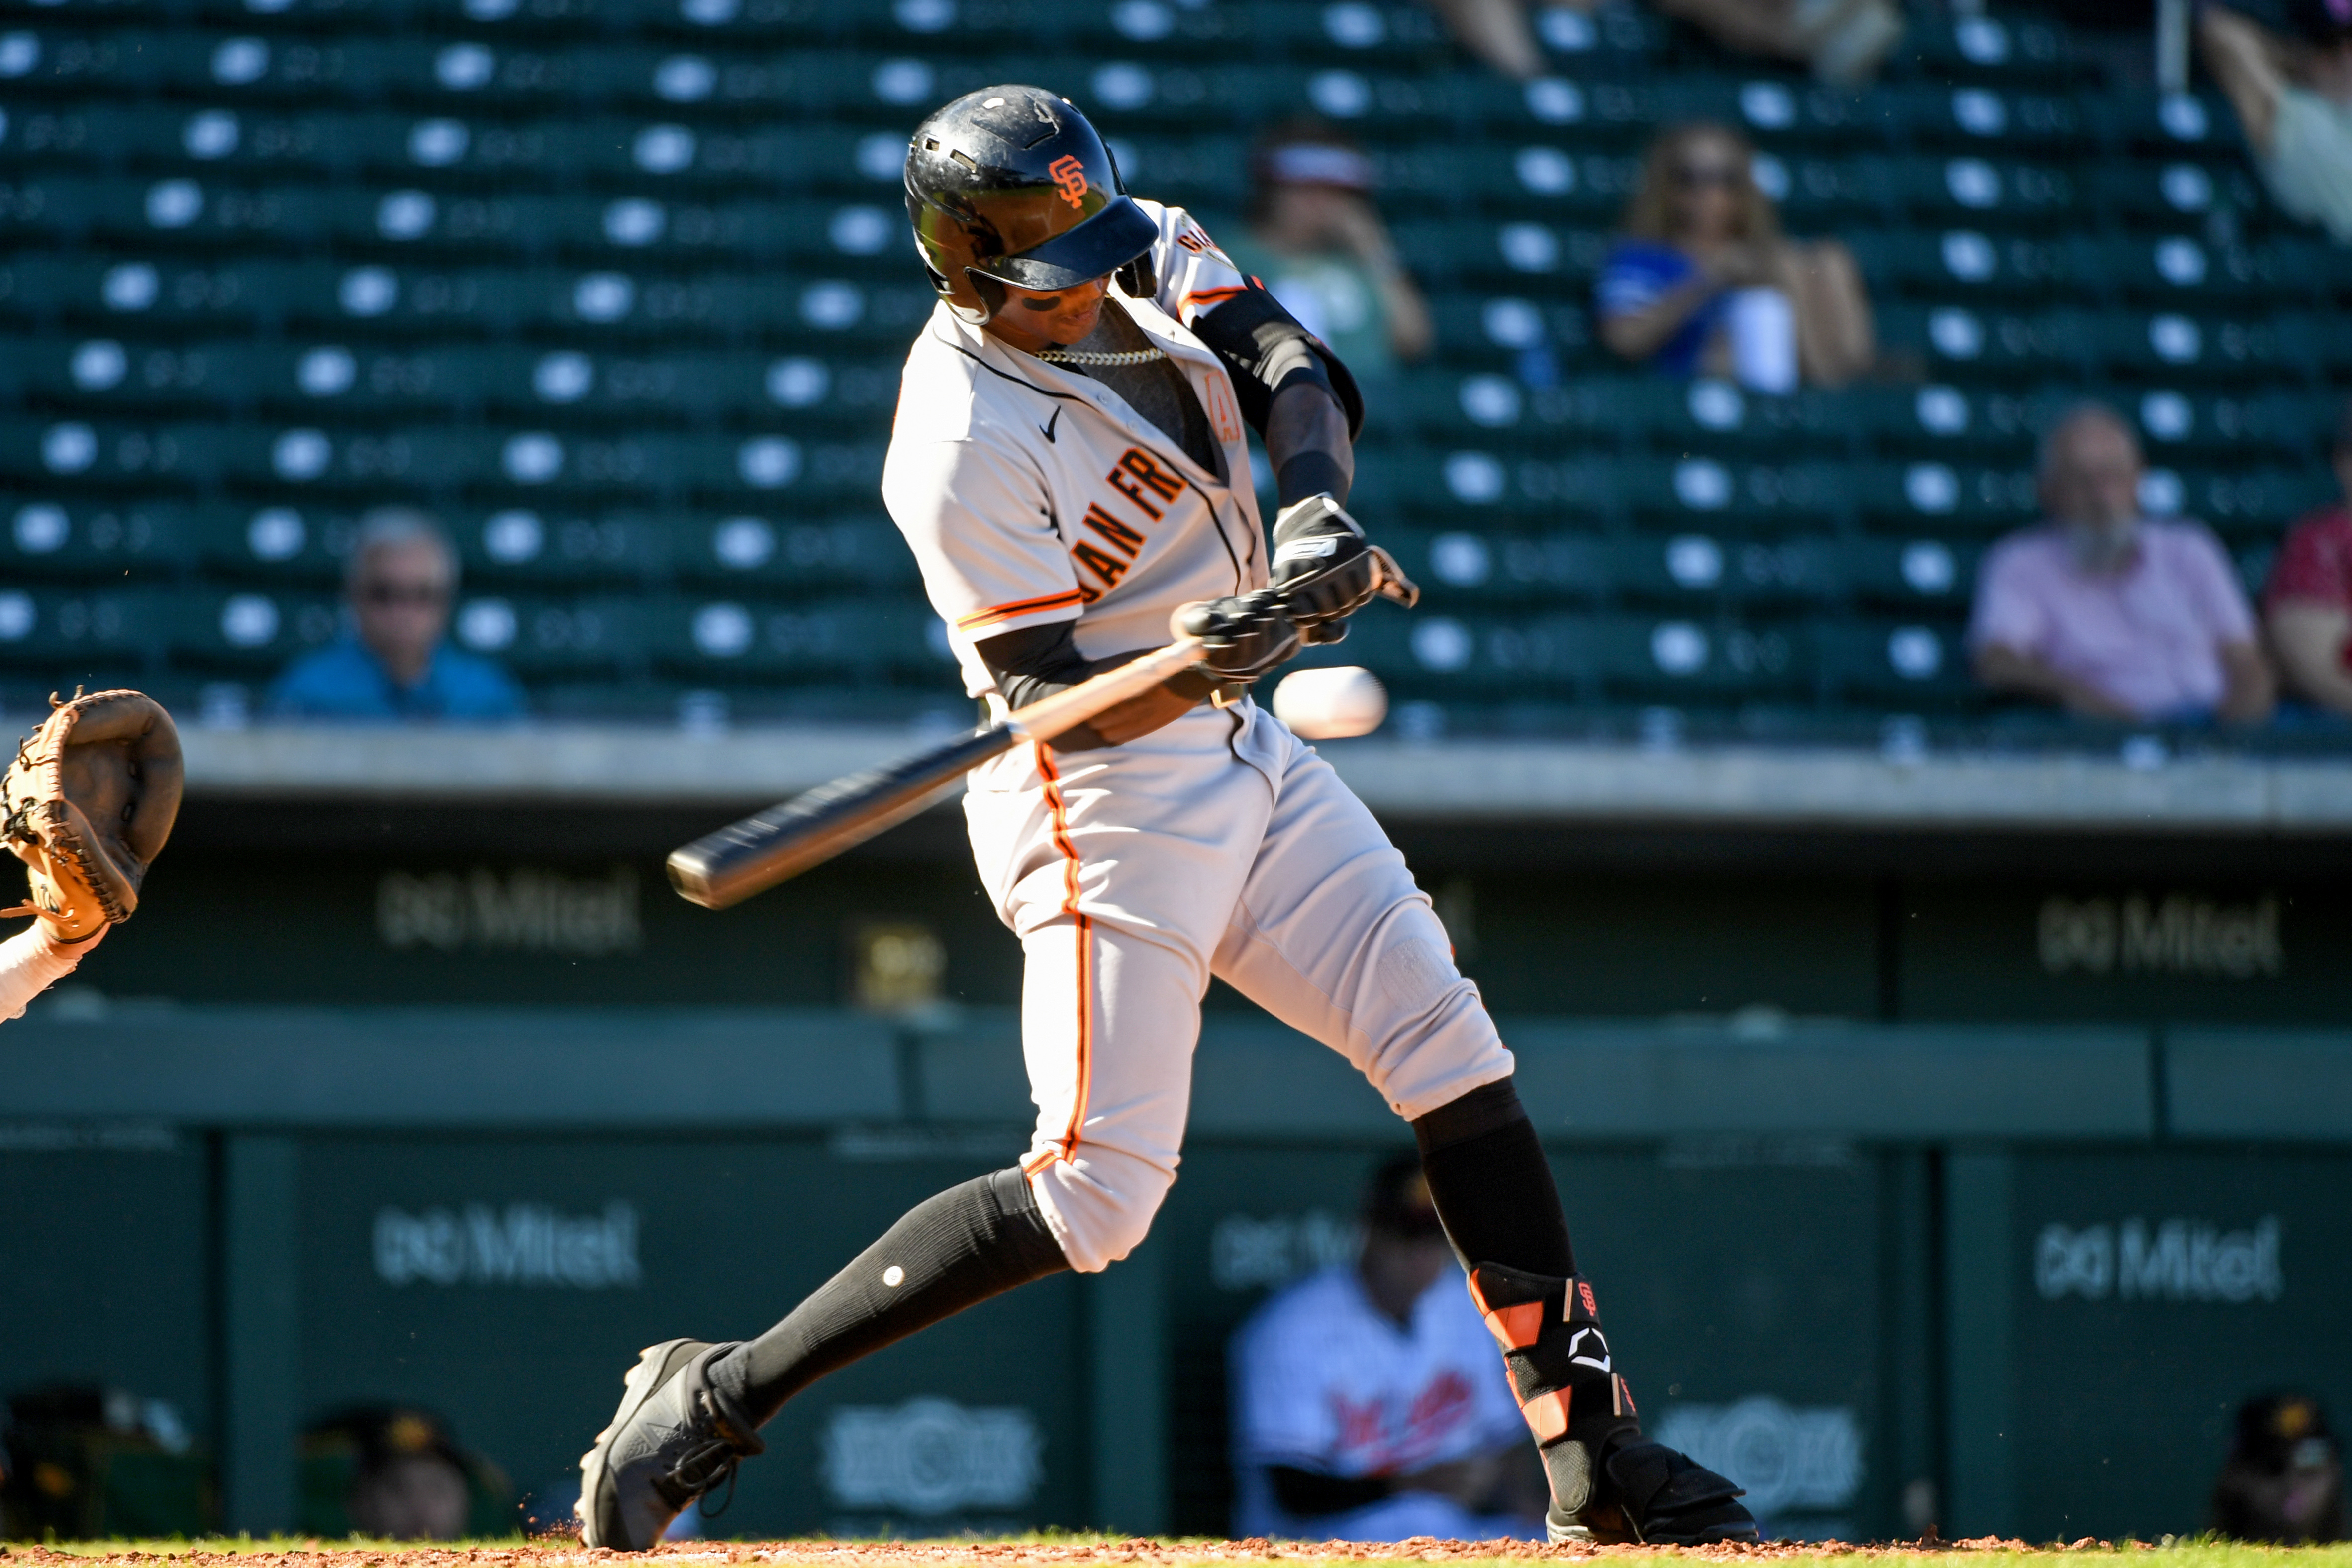 Giants' Marco Luciano might stick at shortstop but gets work at second